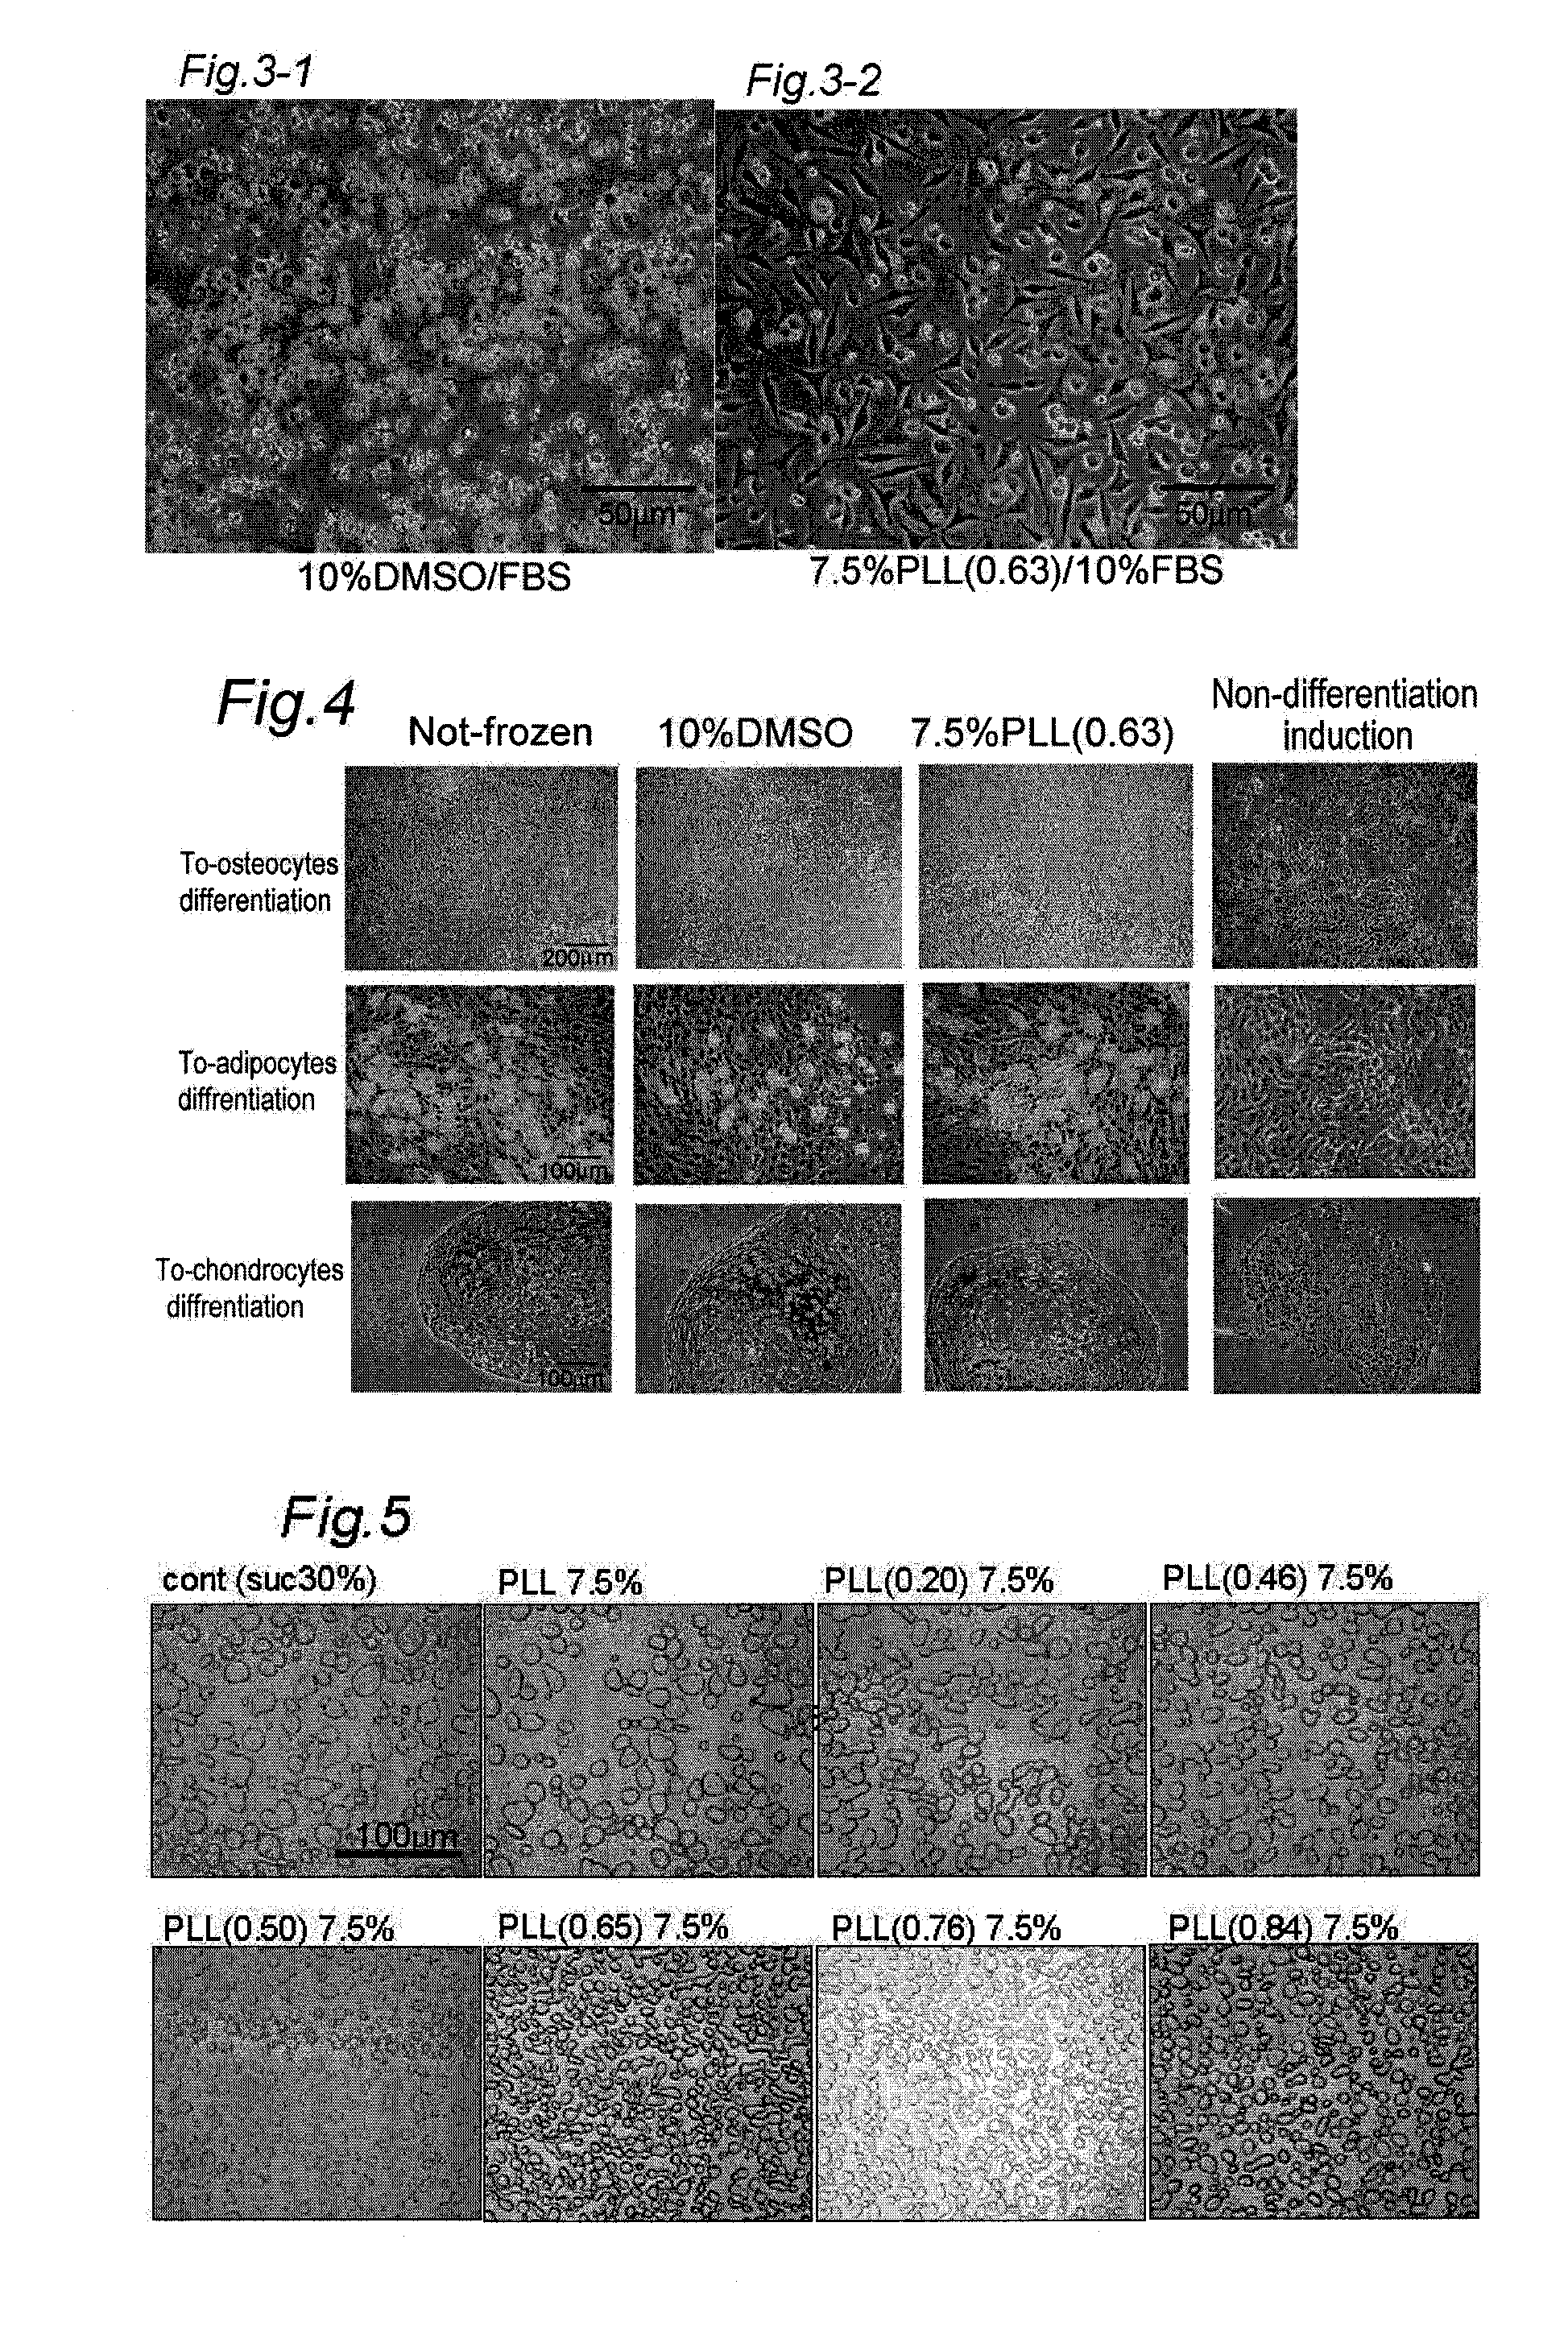 Composition for cryopreservation of cells and tissues